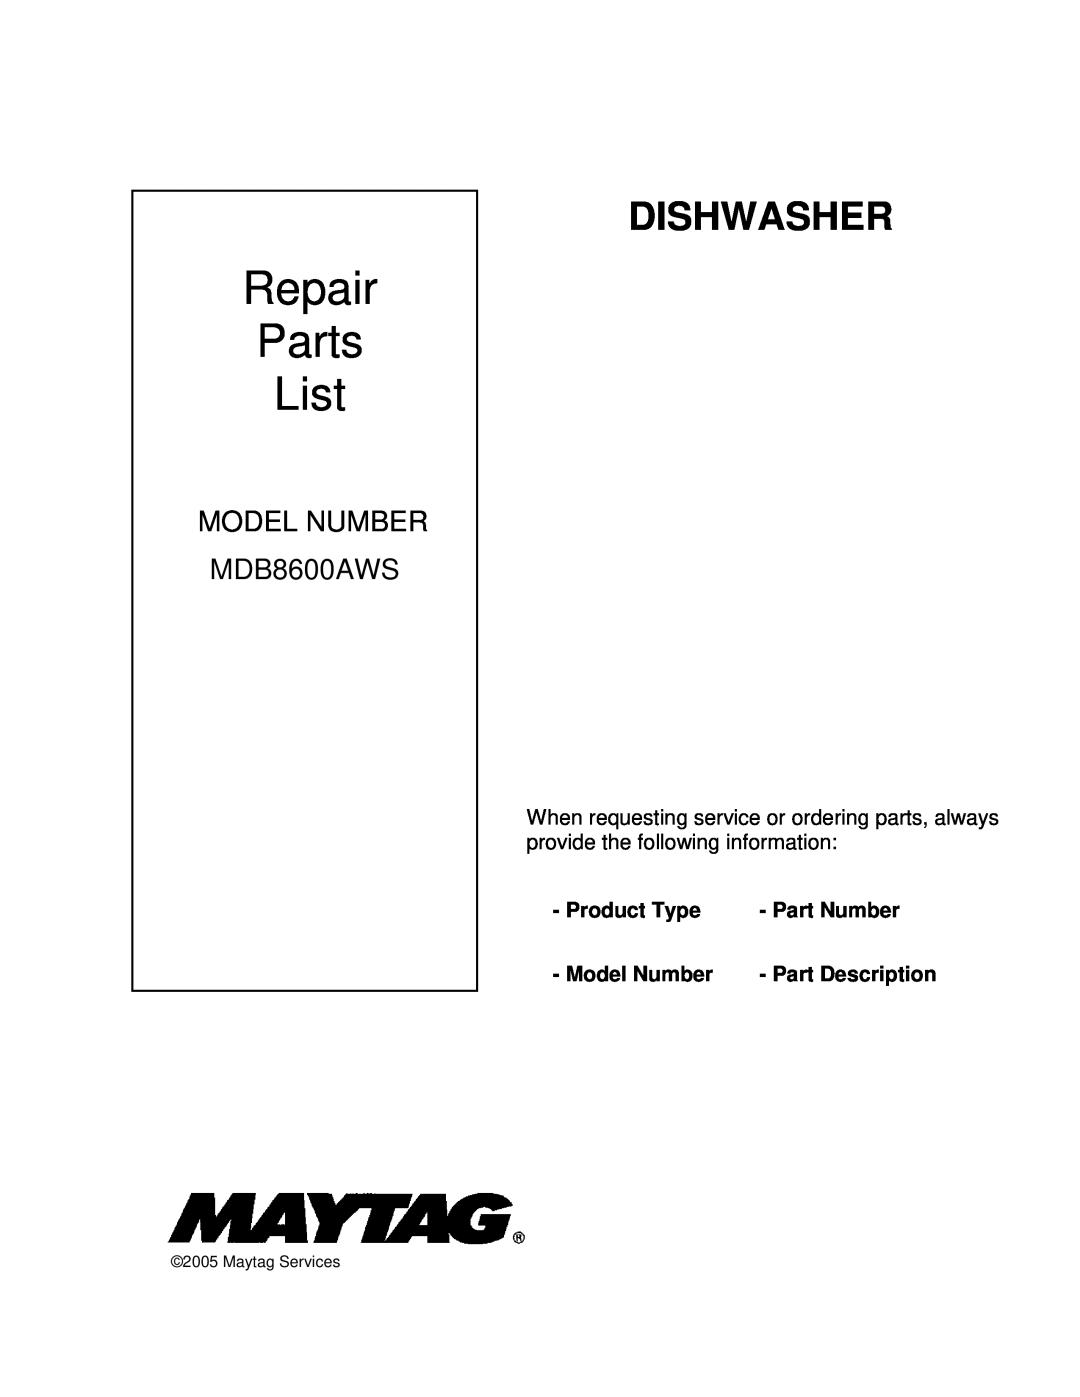 Maytag MDB8600AWS service manual Technical Information- Dishwasher, Specifications, MDB9600AW, Benefits, Power Source 